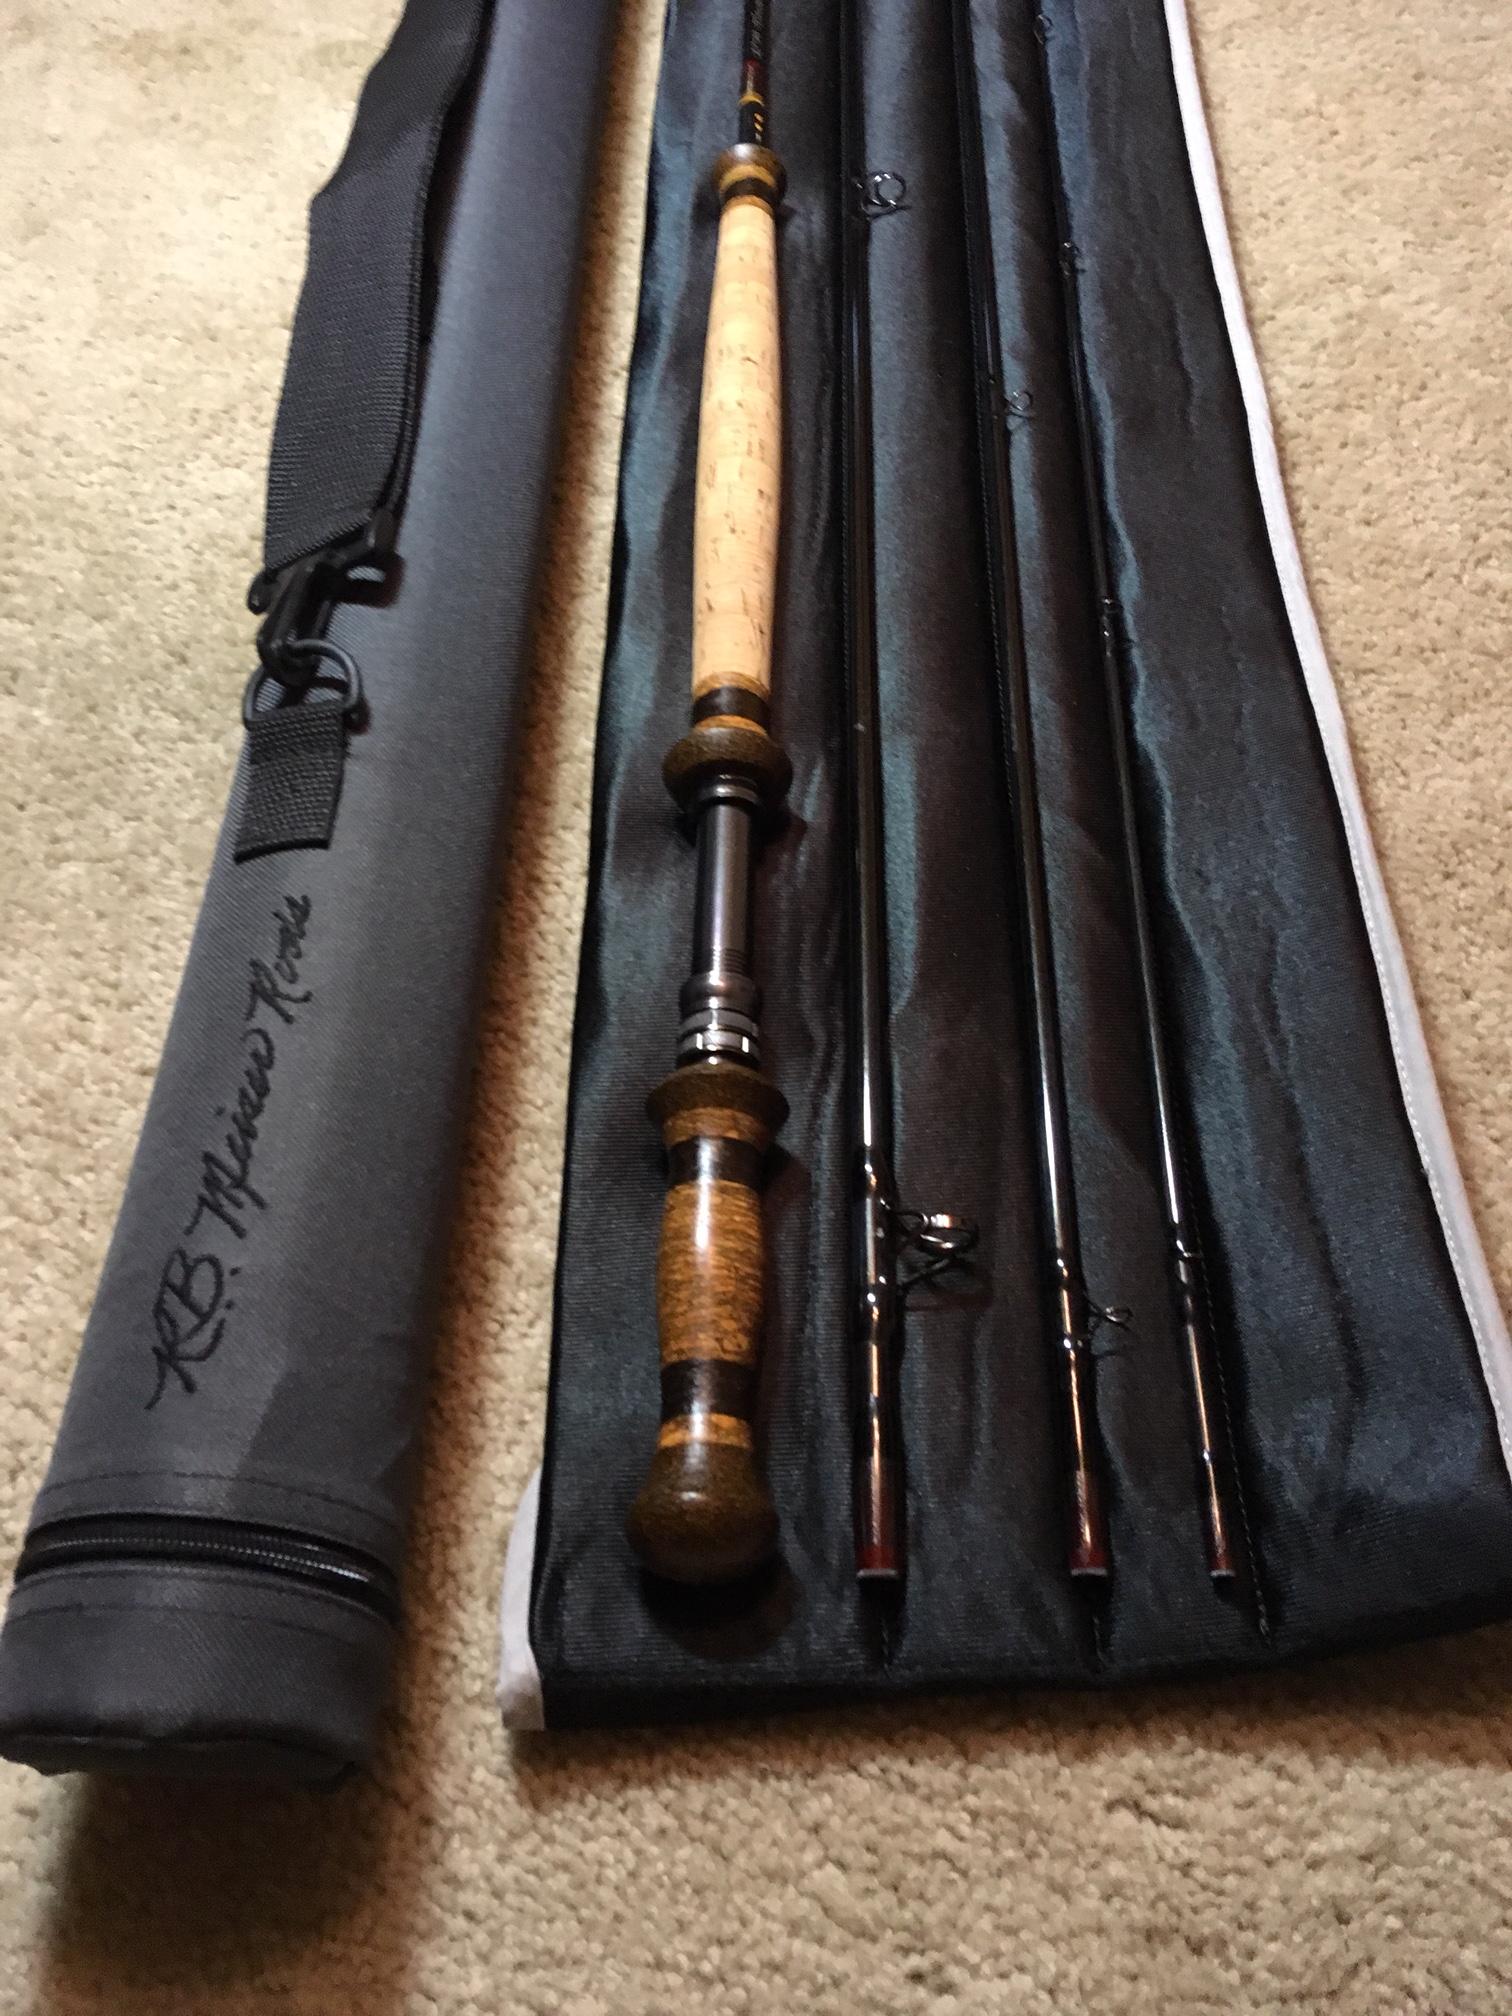 SOLD R.B. Meiser Highlander 11'0 4wt 4pc 300-450gr S2H11045-4 Switch Trout  Spey Rod REDUCED $475 shipped - Buy - Sell - Trade - OzarkAnglers.Com Forum